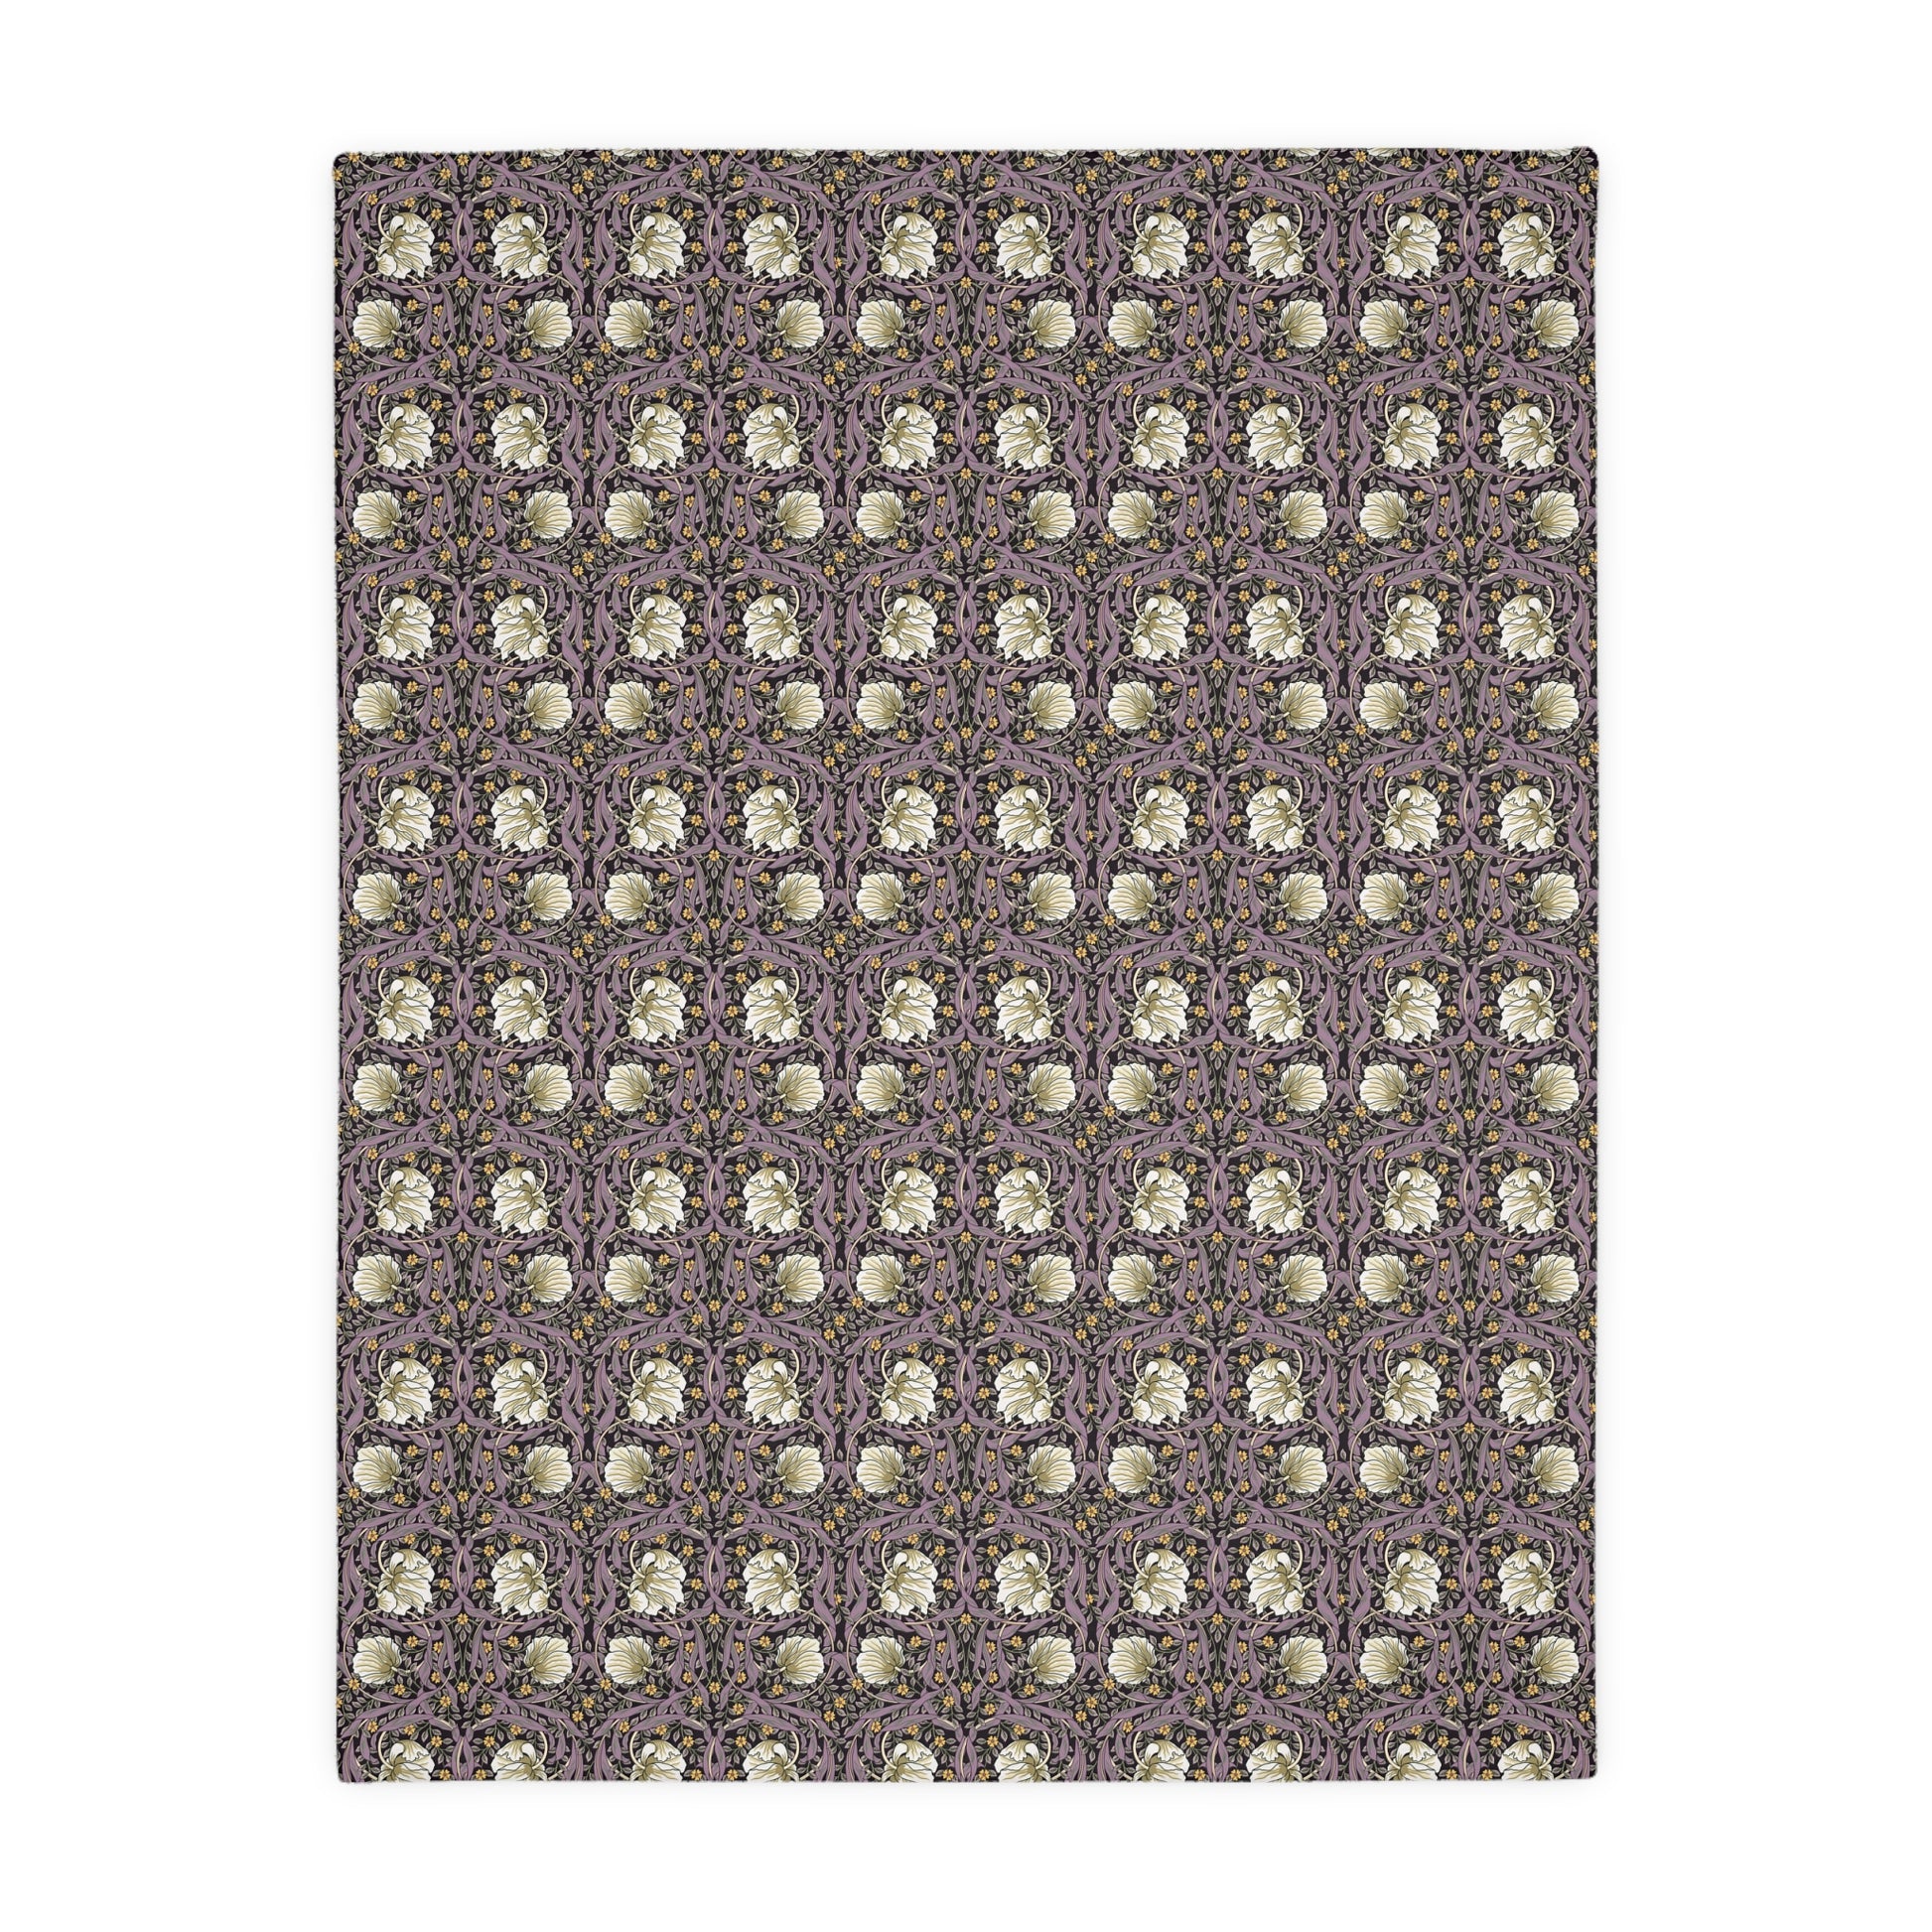 william-morris-co-luxury-velveteen-minky-blanket-two-sided-print-pimpernel-collection-rosewood-lavender-13